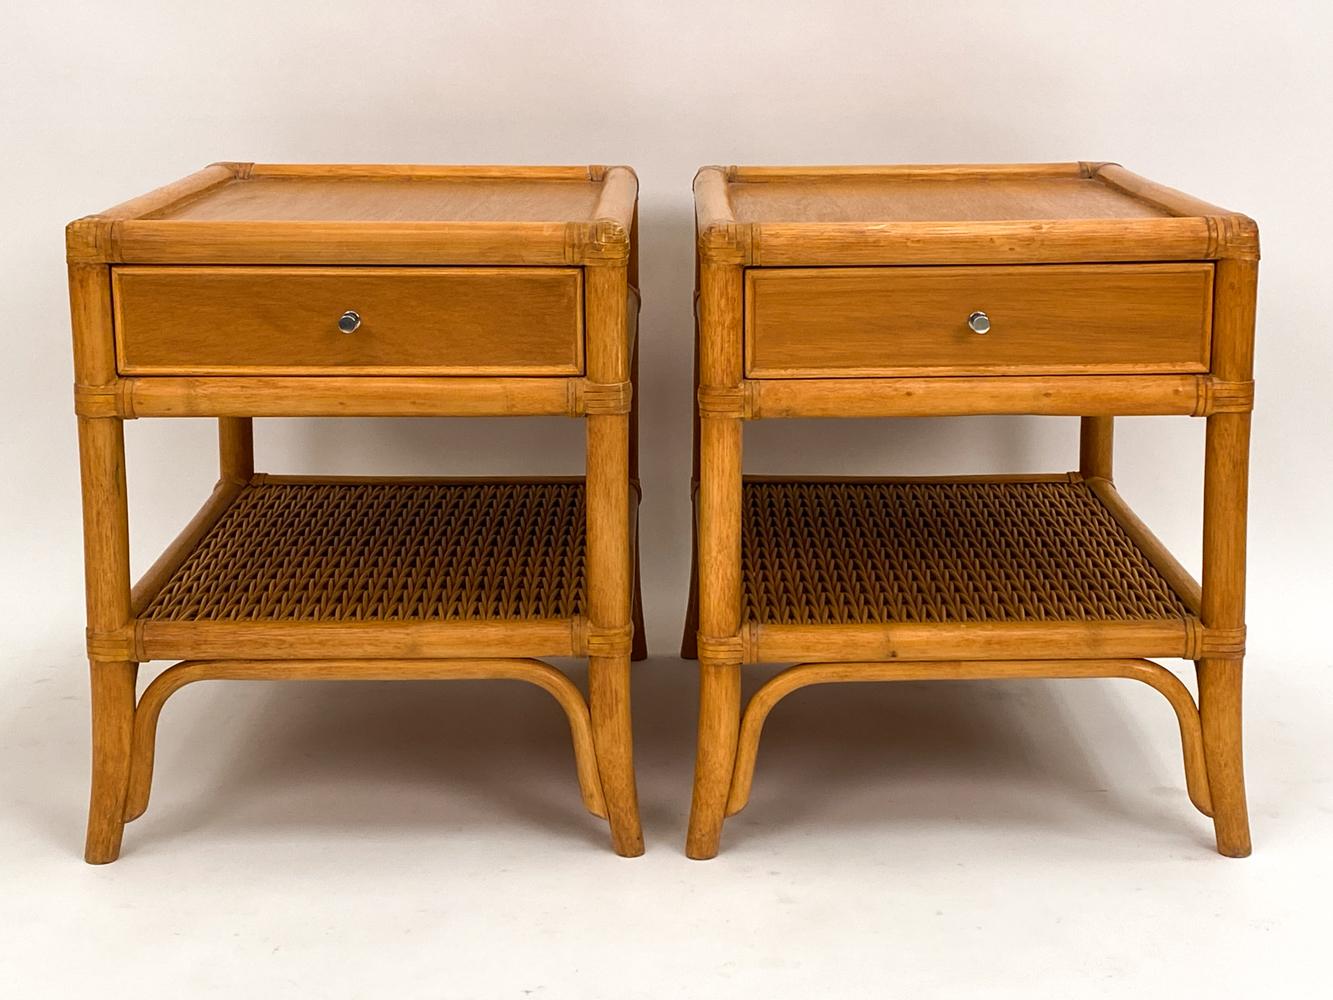 Pair of DUX Swedish Mid-Century Bamboo End Tables or Nightstands In Good Condition For Sale In Norwalk, CT